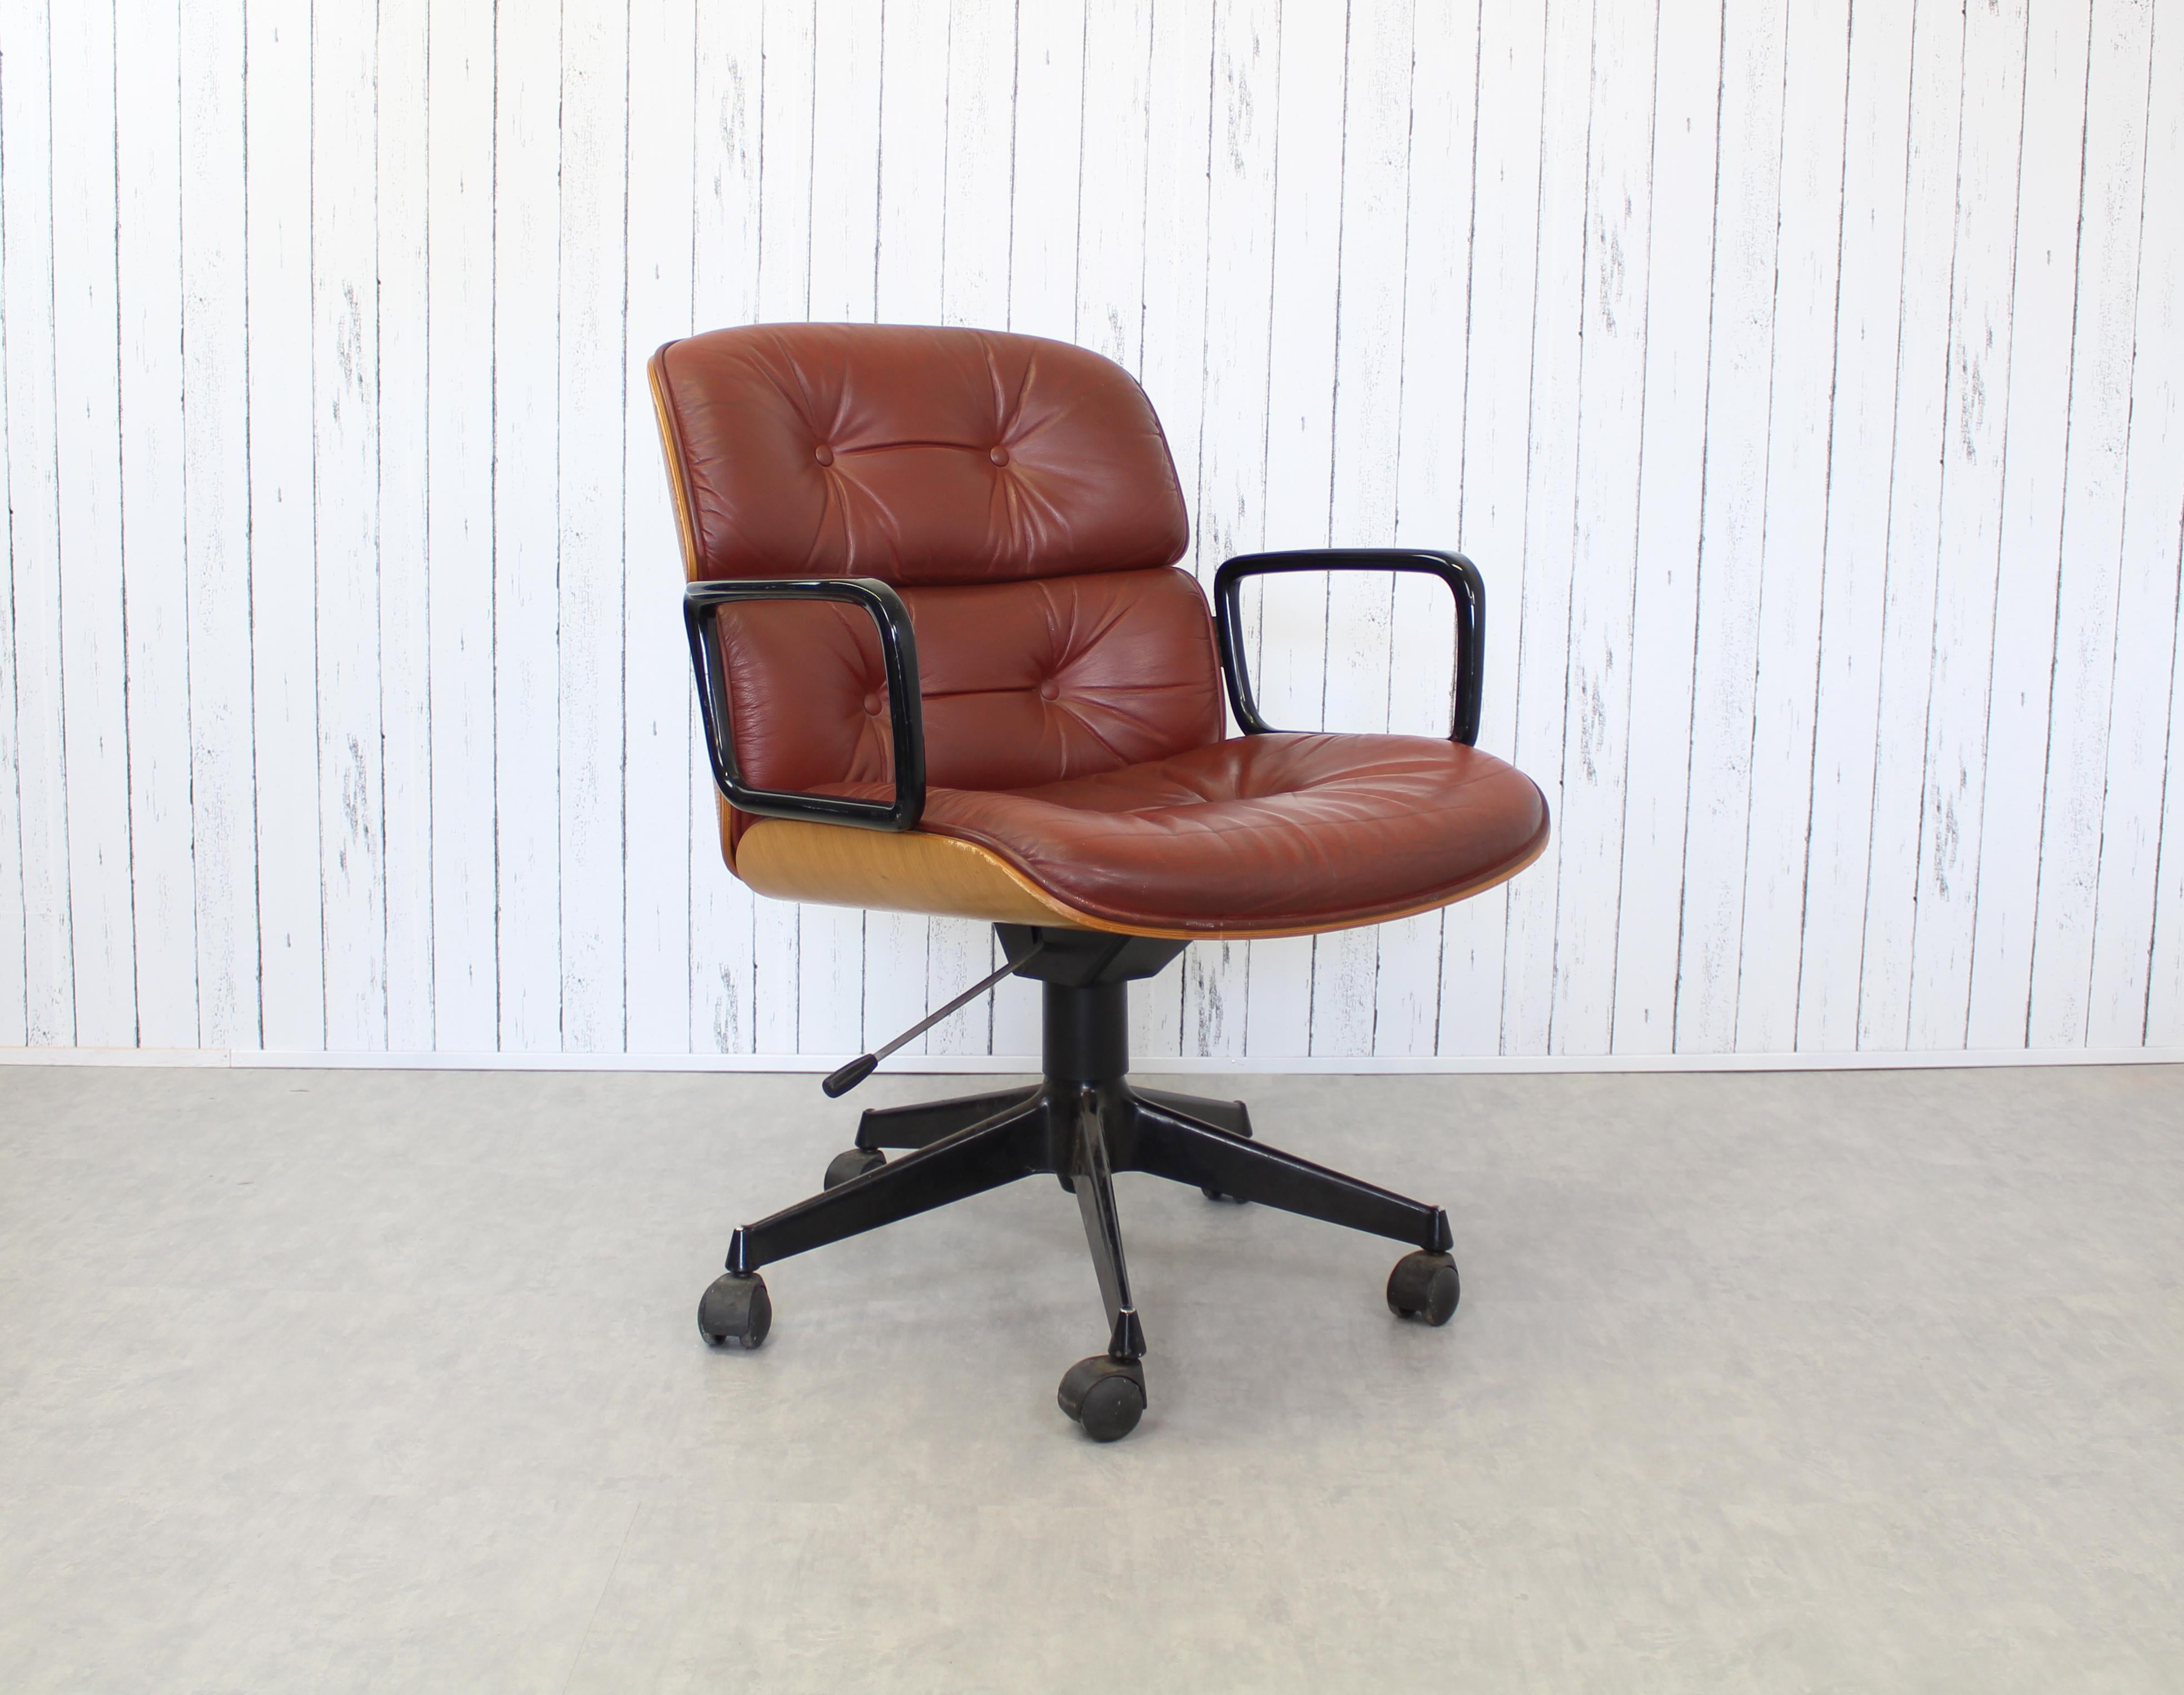 CONTACT FOR ACTUAL SHIPPING COSTS.

Office armchair production Mim design Ennio Fazioli 1960s. Curved wooden shell, upholstered seat and back covered in original ochre-colored fabric. Four-spoke cast aluminum base with swivel casters, manufacture